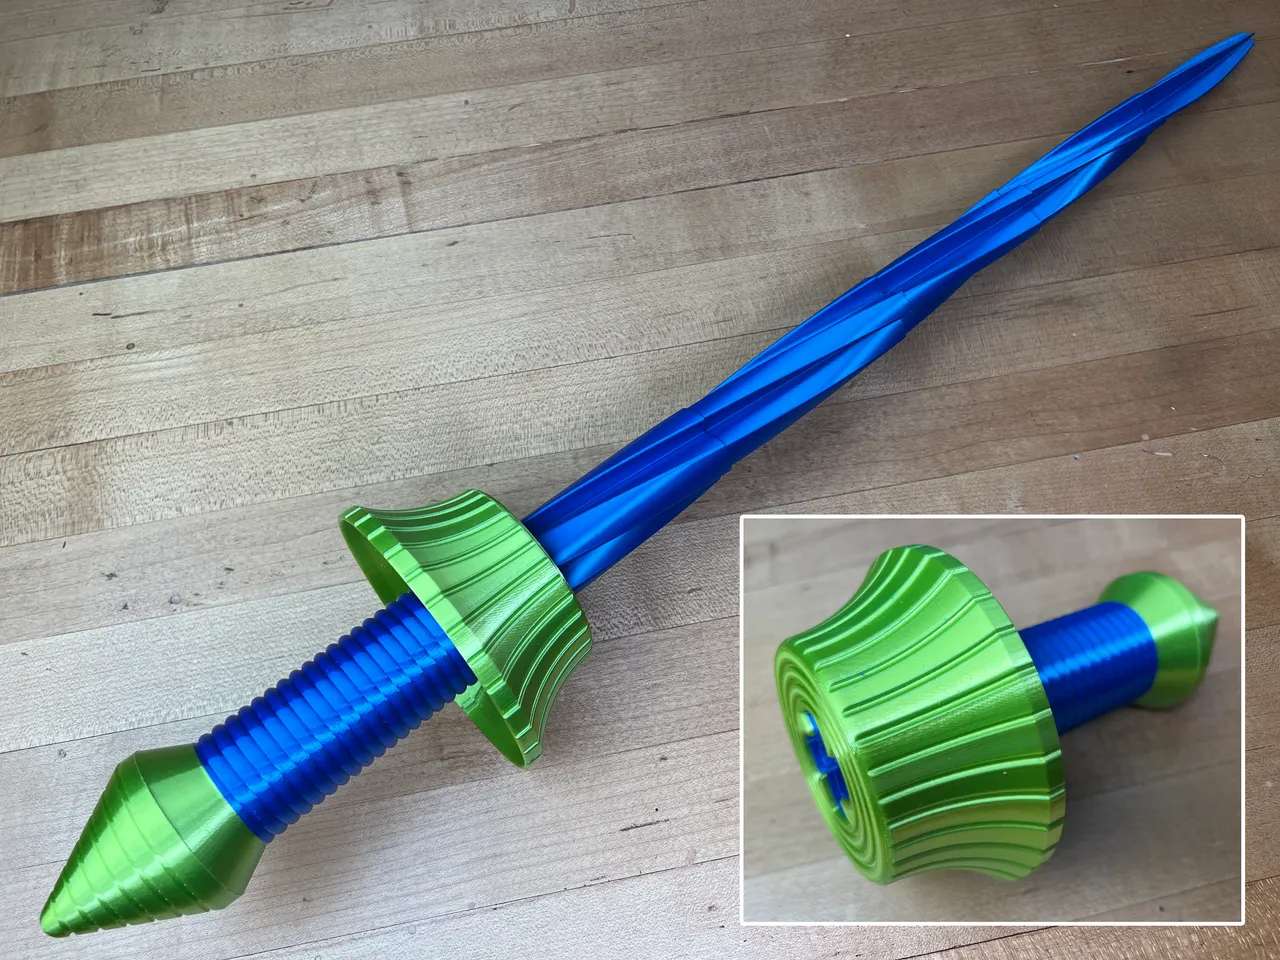 3D Printed Sword Breaker with Four-sided Prism-shaped Blades